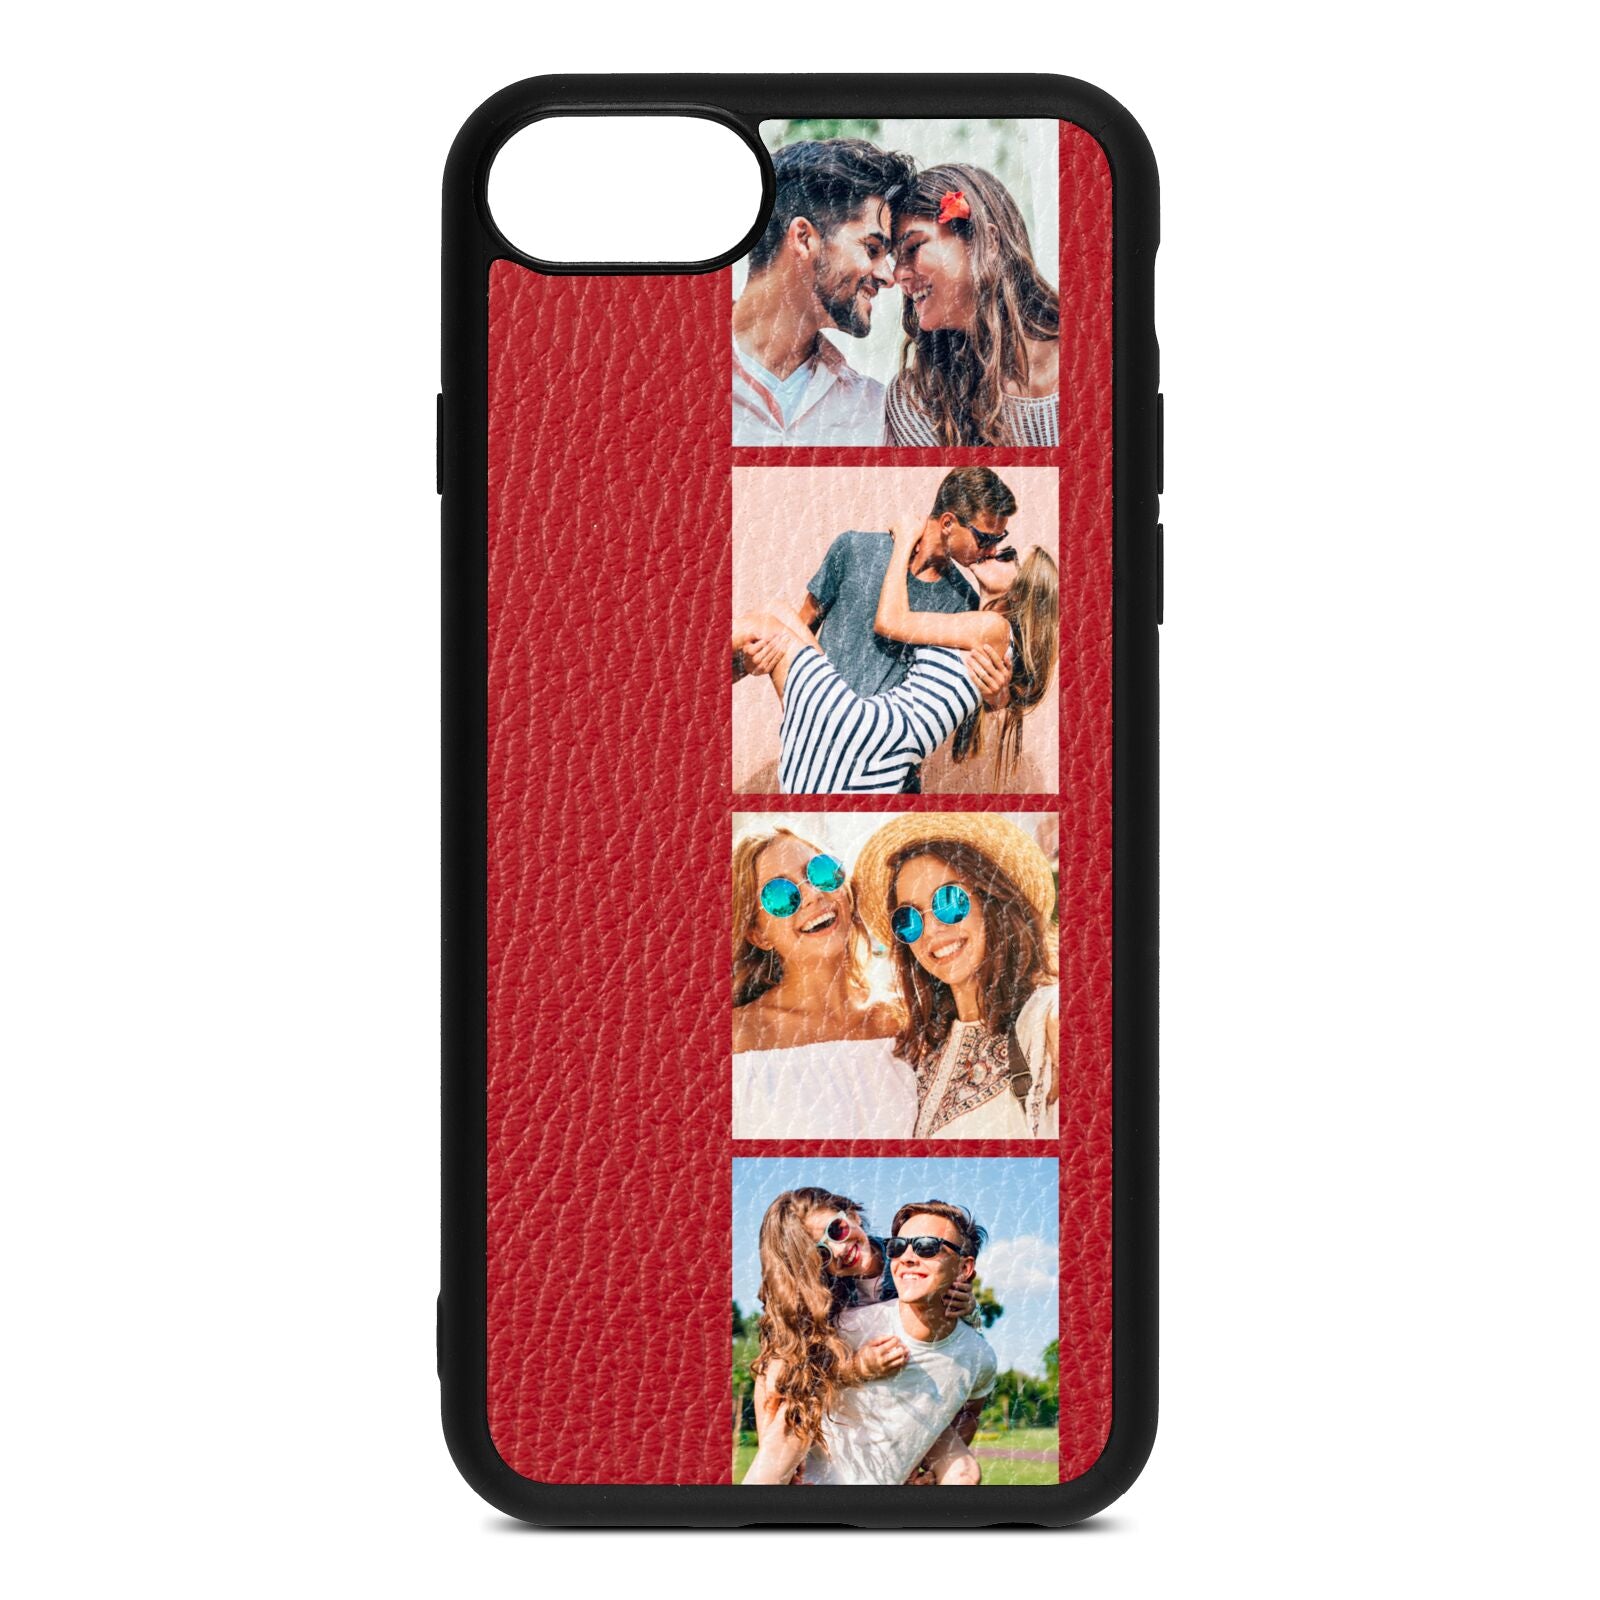 Photo Strip Montage Upload Red Pebble Leather iPhone 8 Case